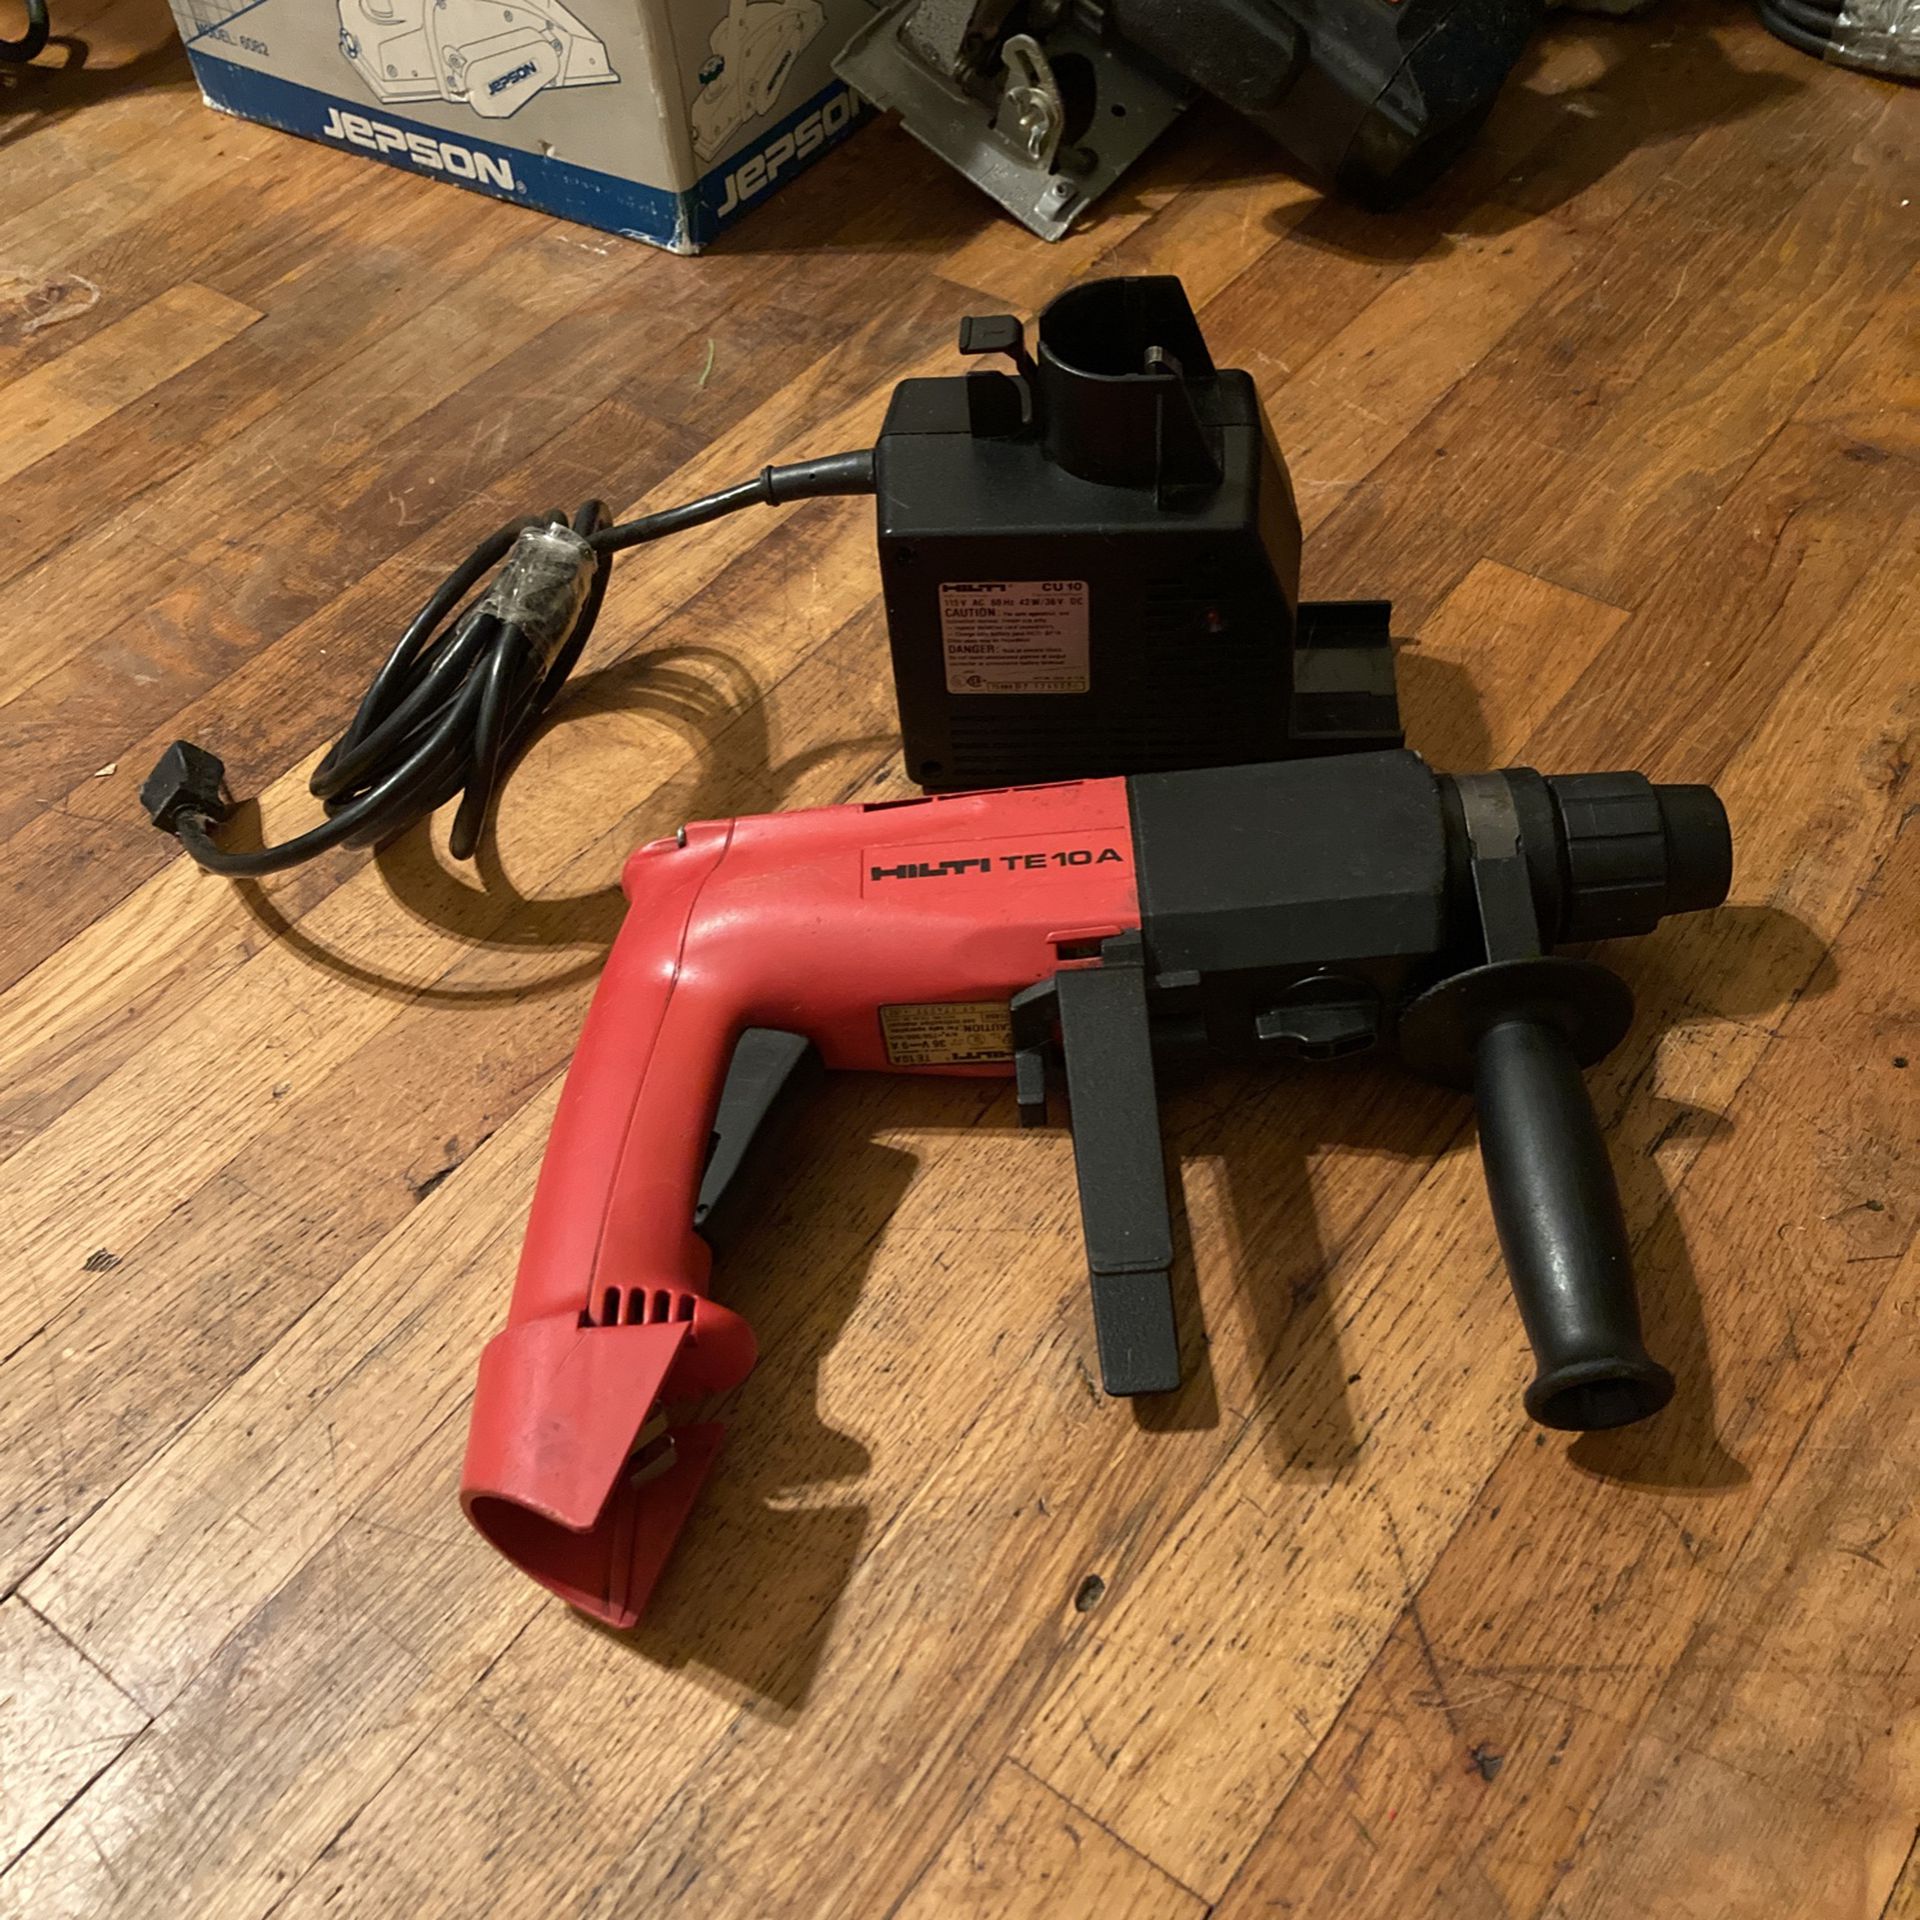 nikotin slette Macadam SOLD SOLD HILTI CORDLESS ROTARY L LDRILLk LOO OCHARGER TEE10A Excellent  Condition $50.00 or Best OFFERplp for Sale in Islip Terrace, NY - OfferUp